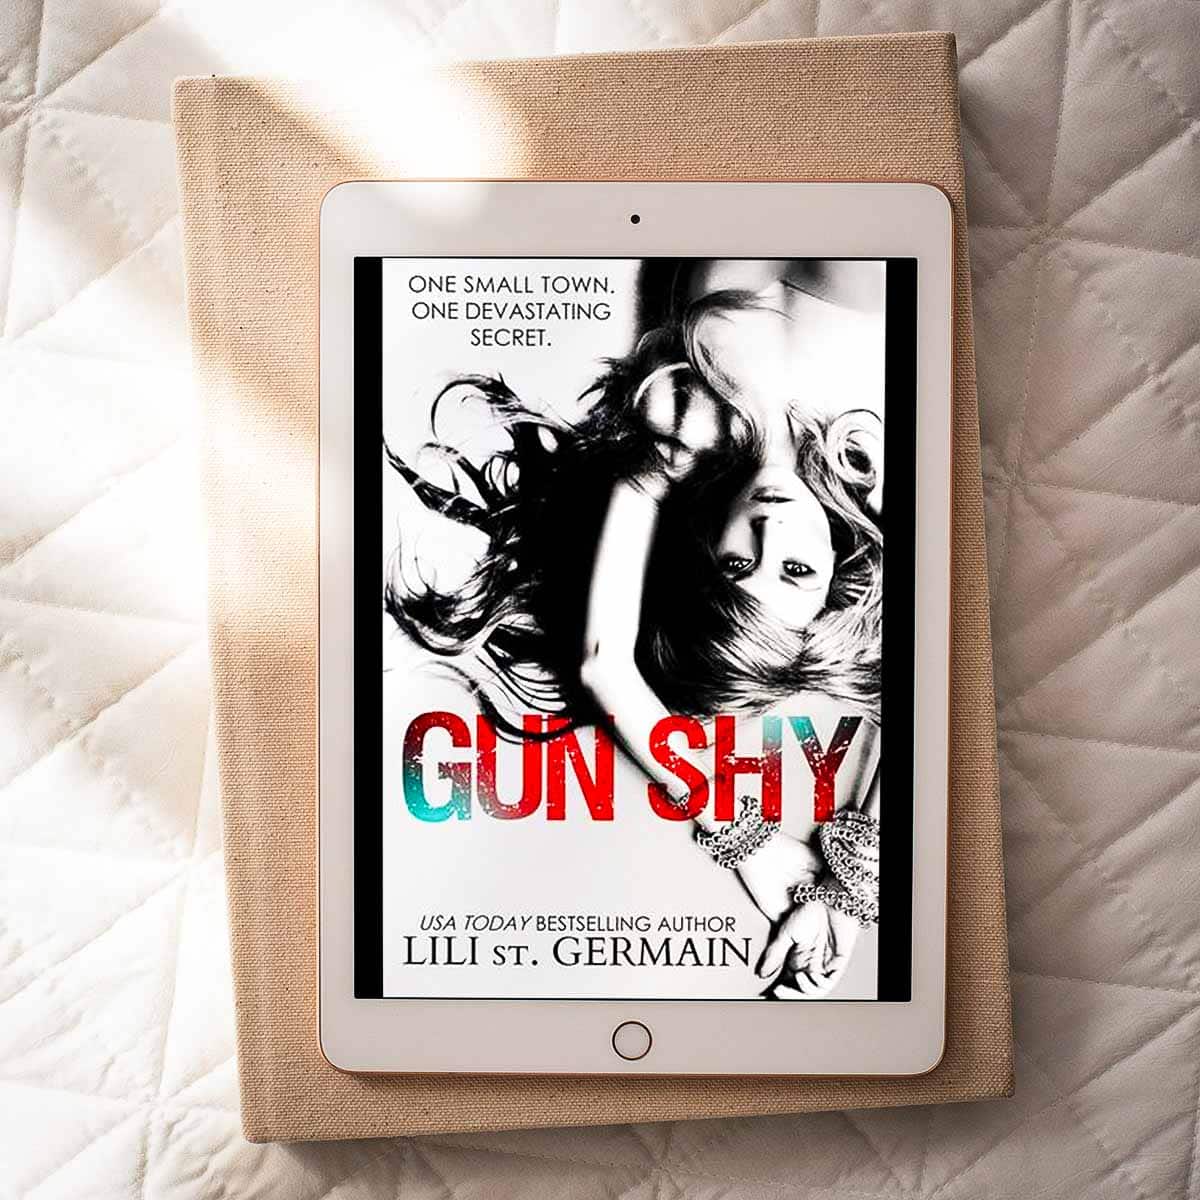 Read an entire chapter of Gun Shy by Lili St. Germain, a mysterious and suspenseful psychological thriller that will keep you on the edge of your seat!